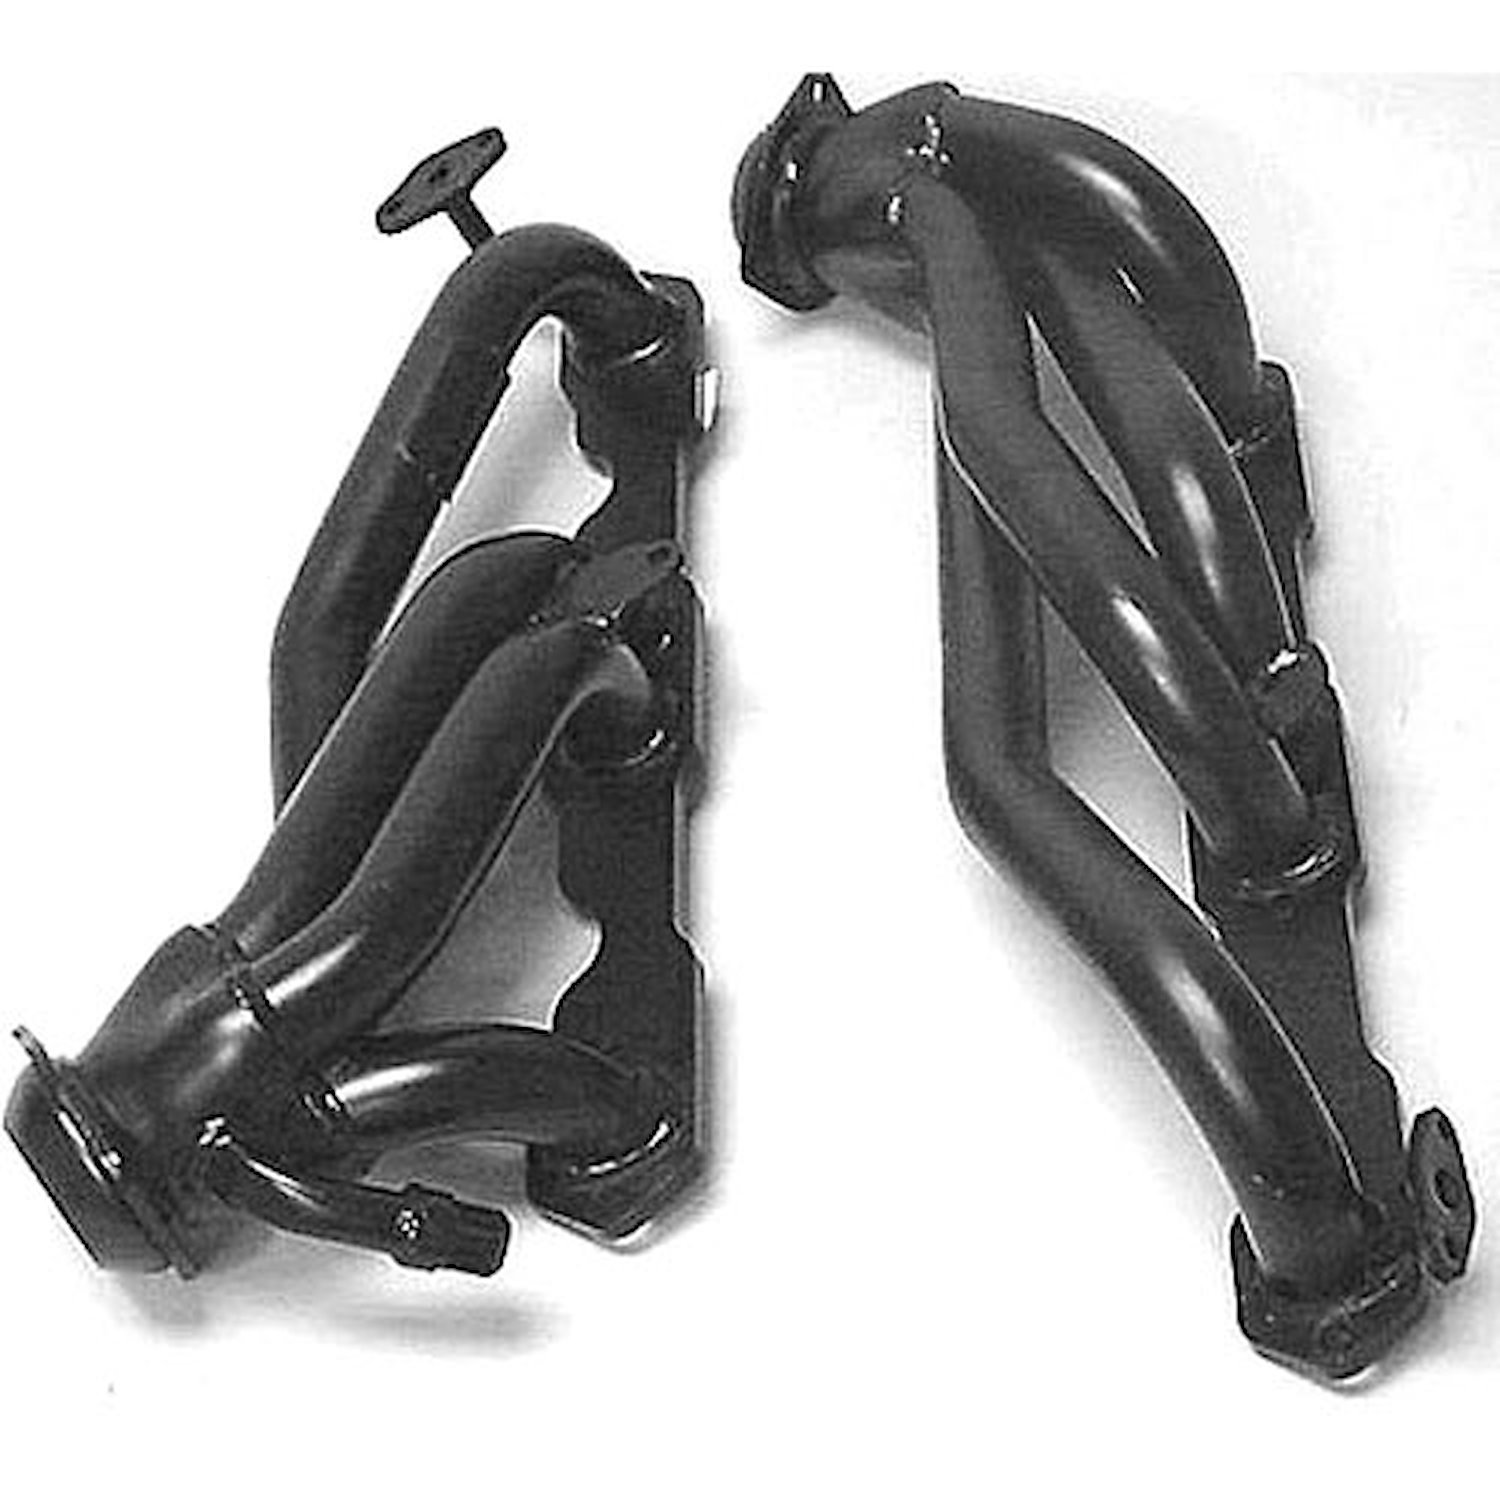 Painted Truck Headers 1998-1999 Chevy/GMC Pickup/Suburban/Tahoe 5.7L With Air